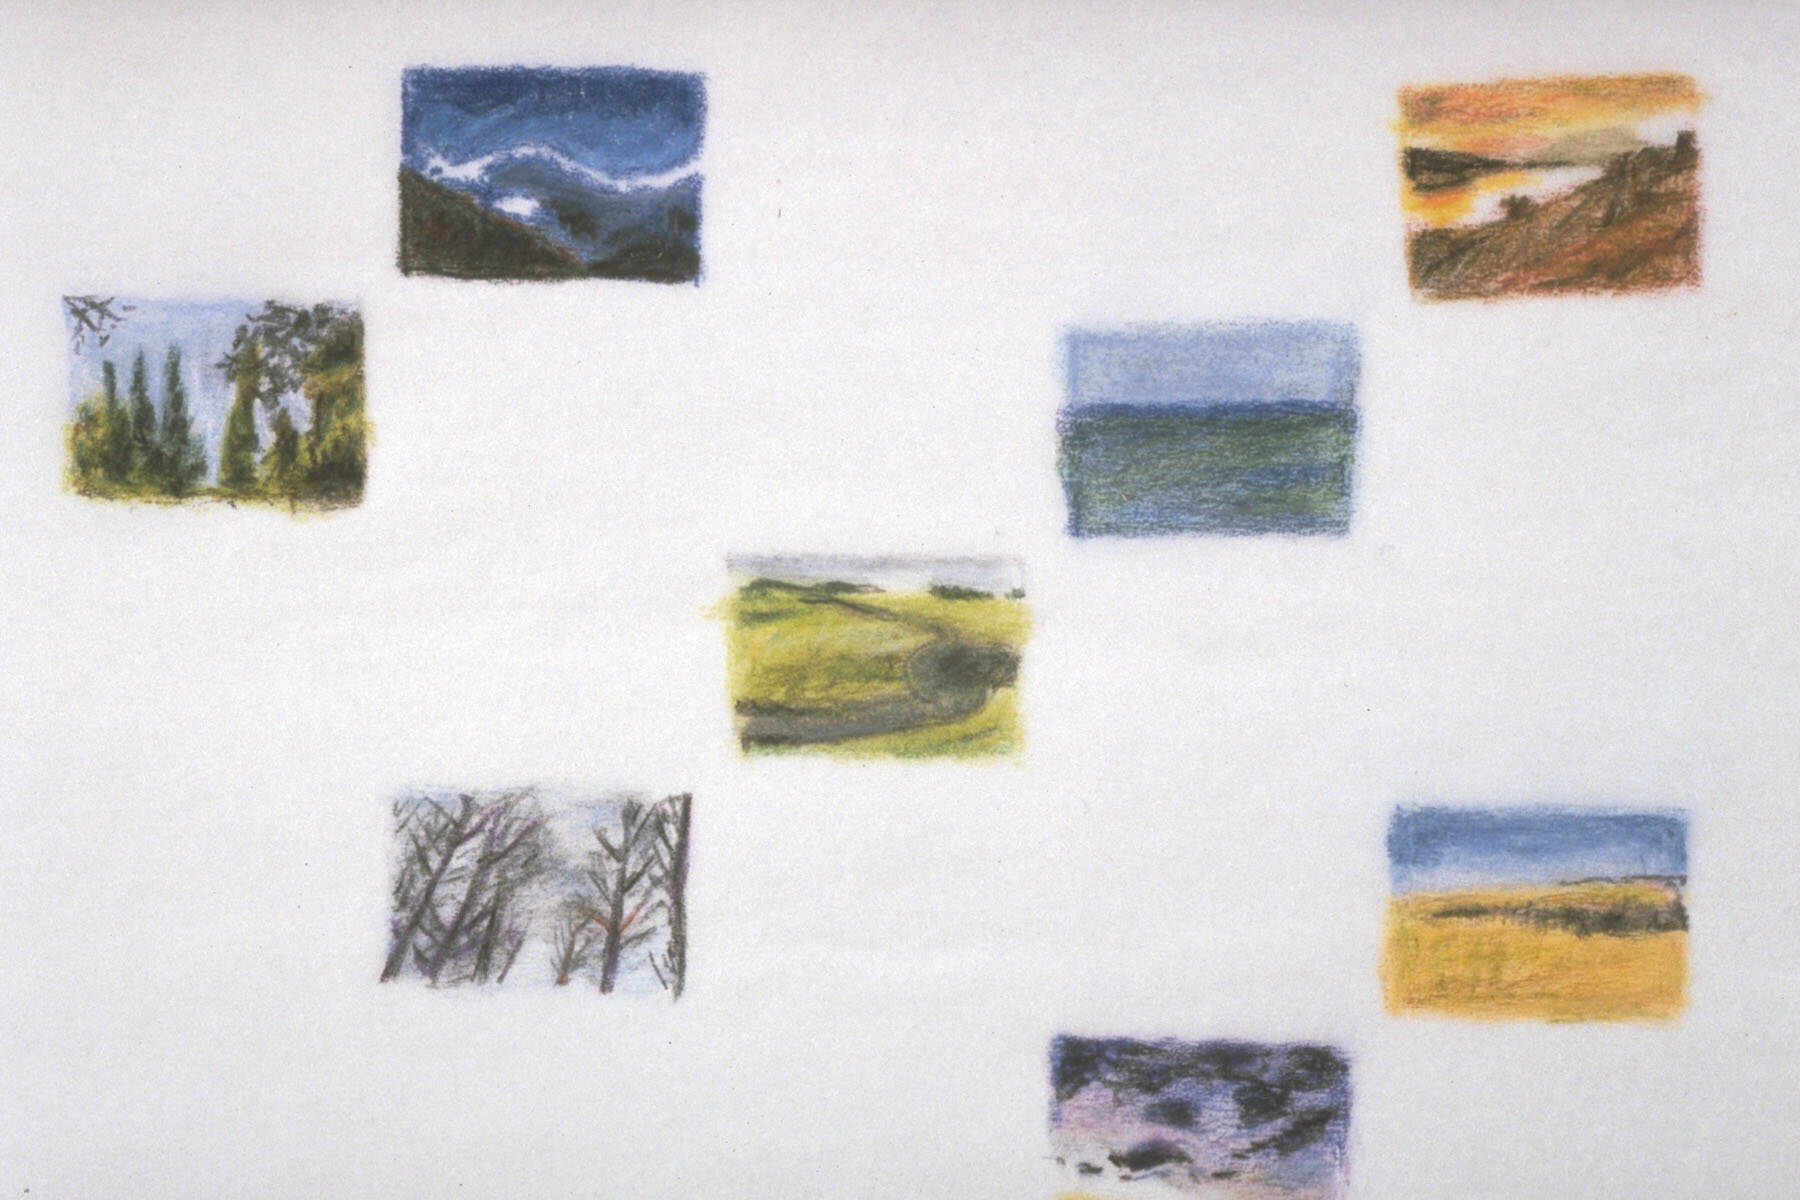   landscape , (detail), 1999, colored pencil on vellum, 5.5 x 7 inches   